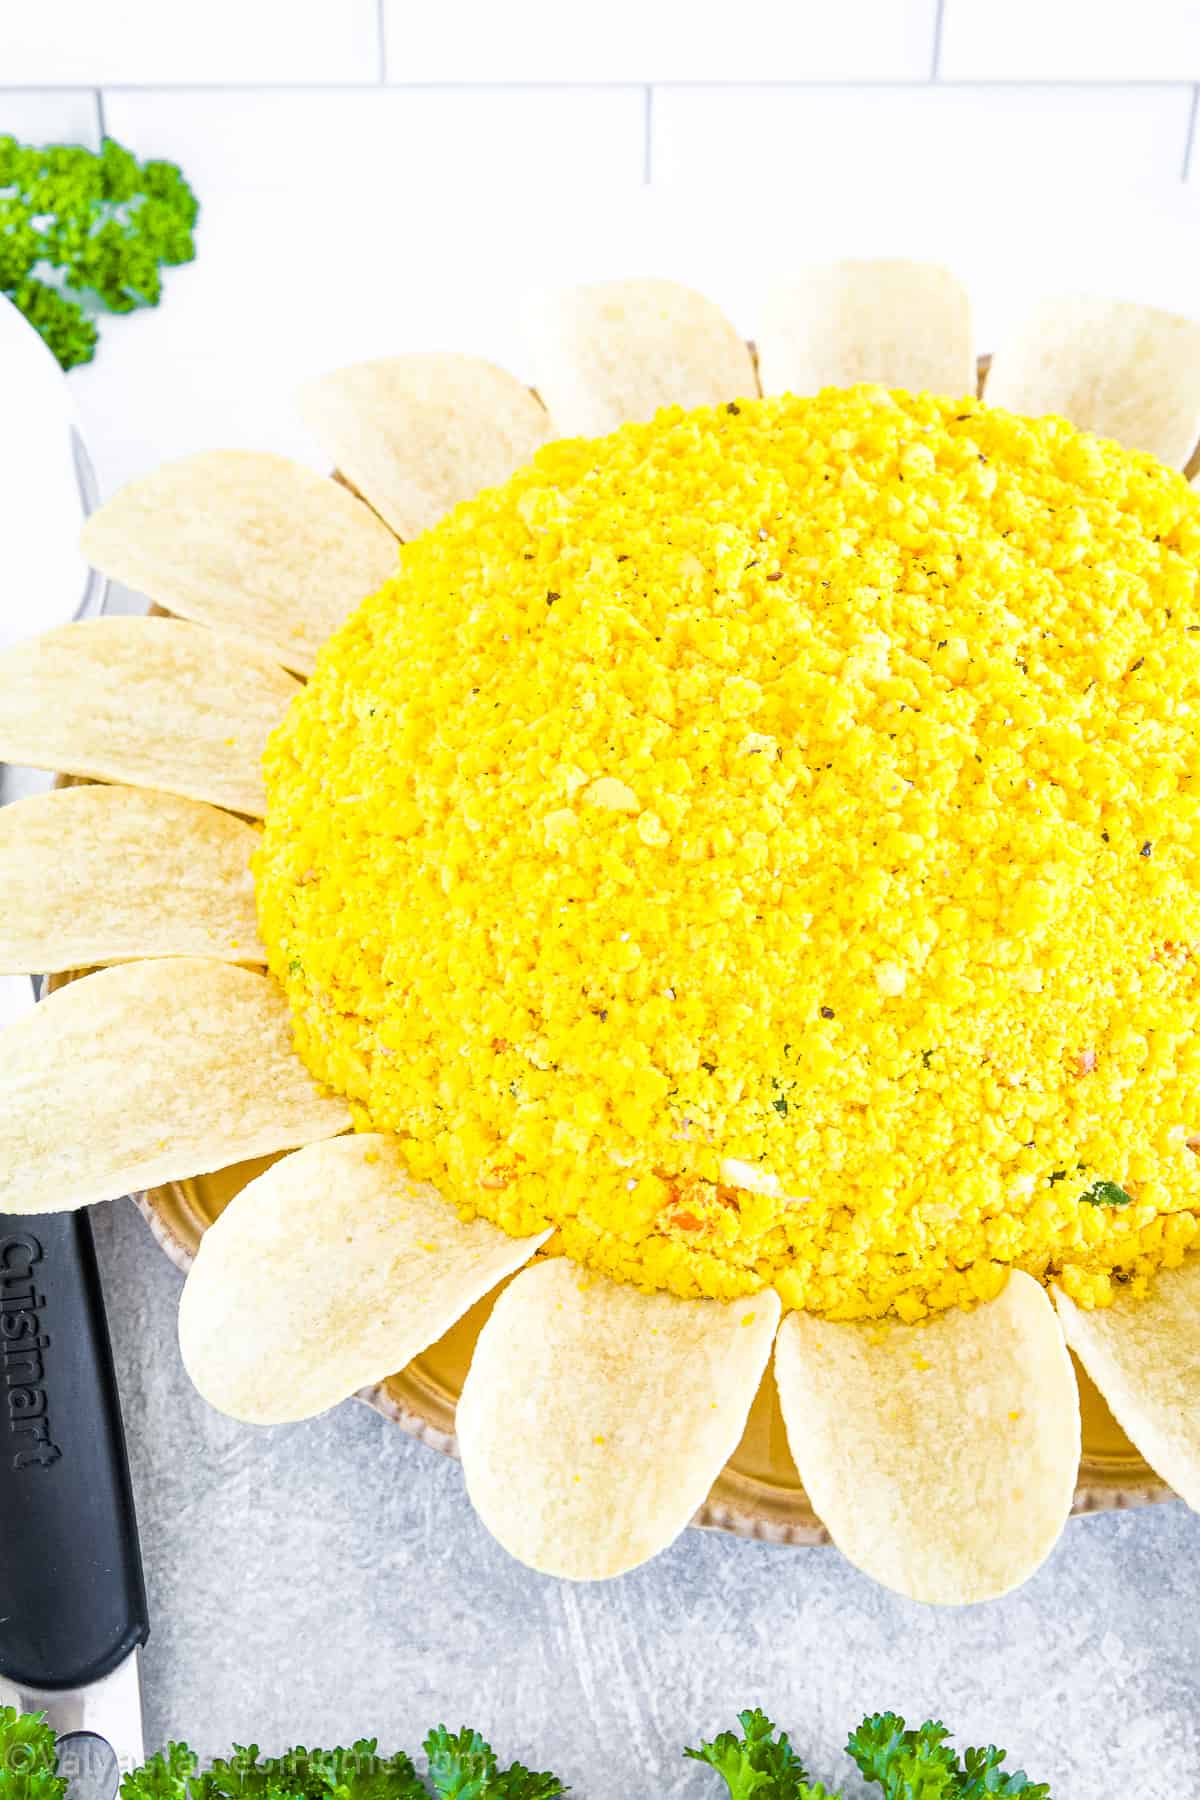 Sunflower salad is one of the most refreshing, nutritious, and delightful dishes that you can add to your recipe collection!